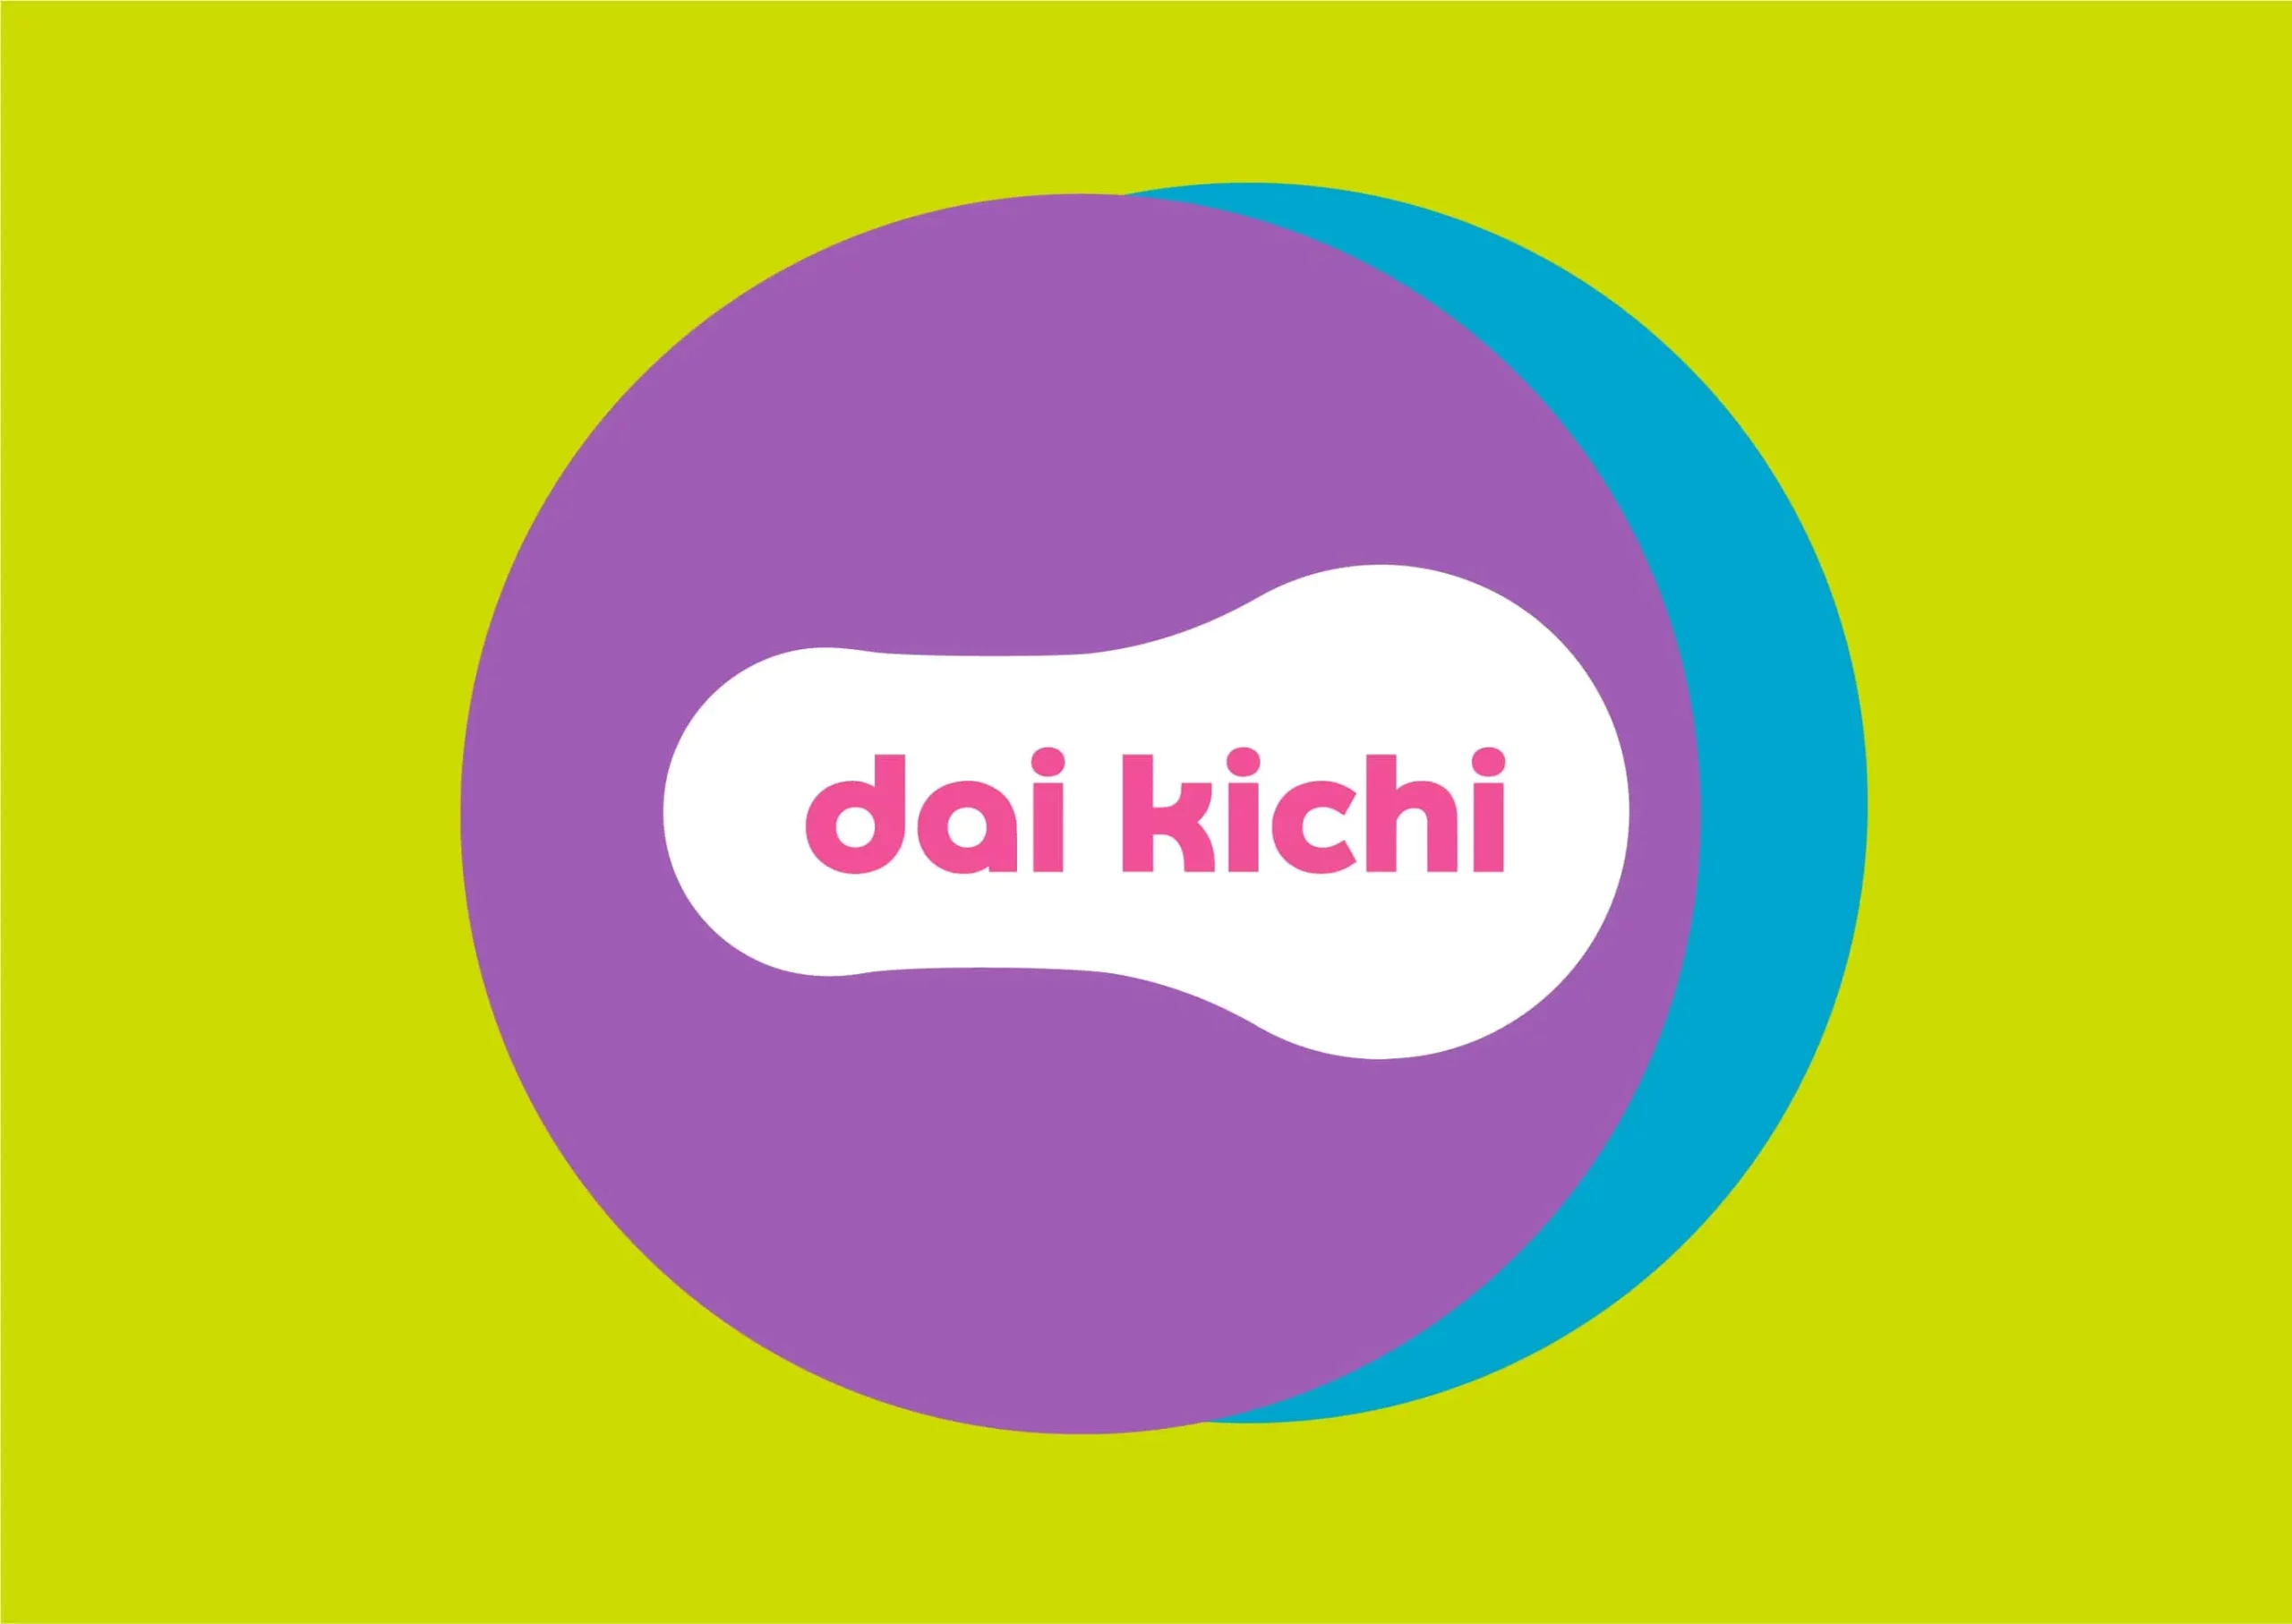 The logo for dai kichi on a green background.